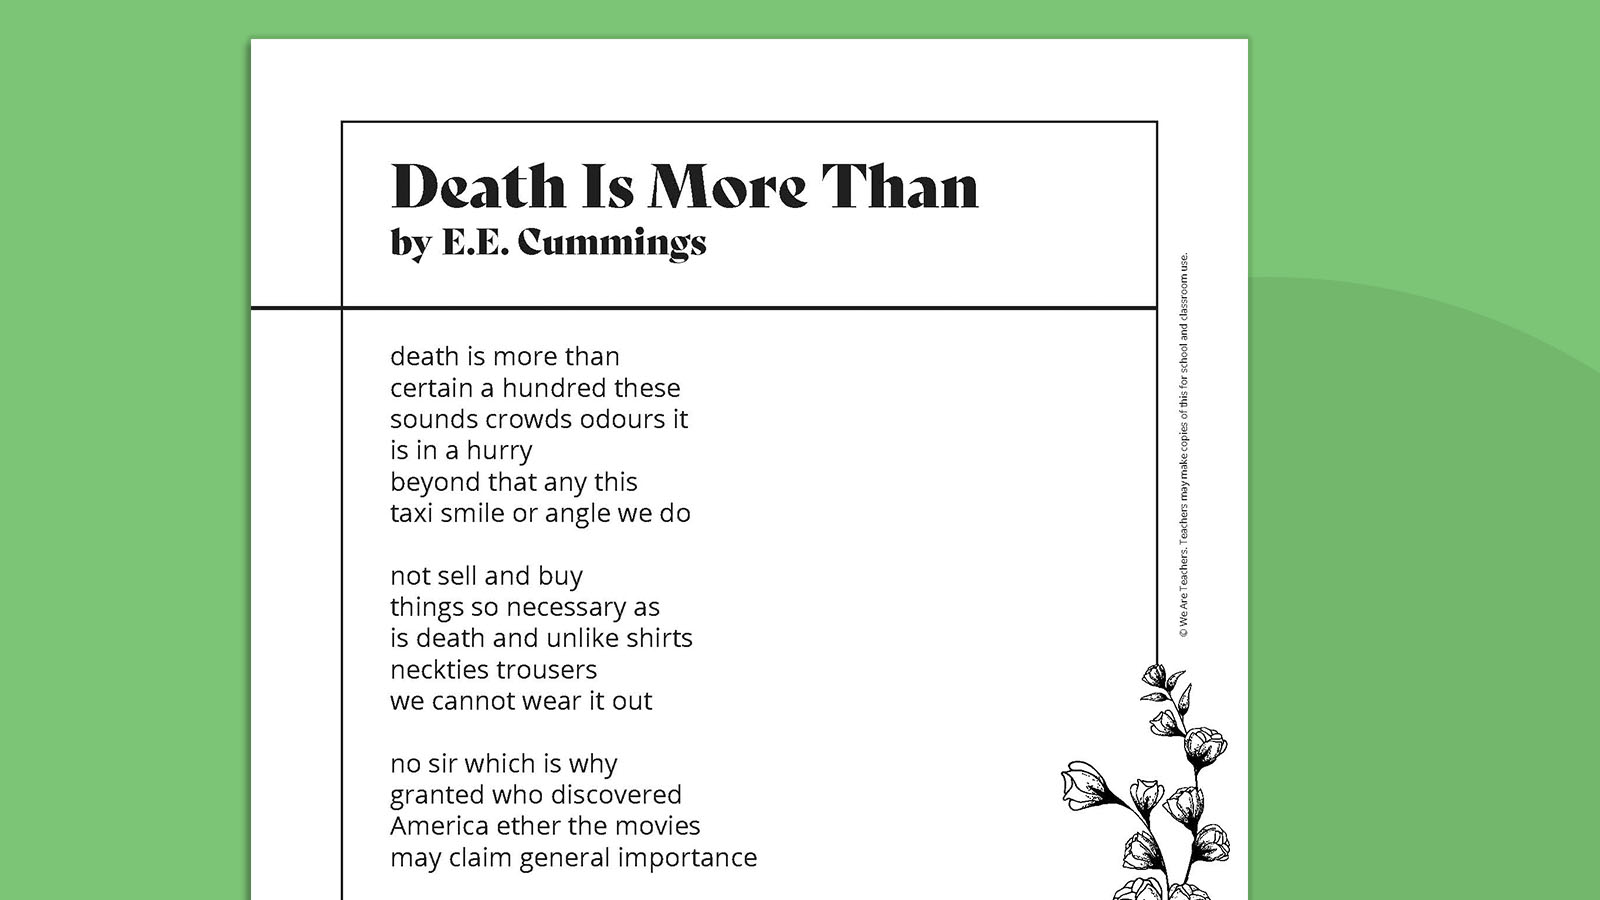 death is more than
certain a hundred these 
sounds crowds odours it 
is in a hurry ...- E.E. Cummings poems